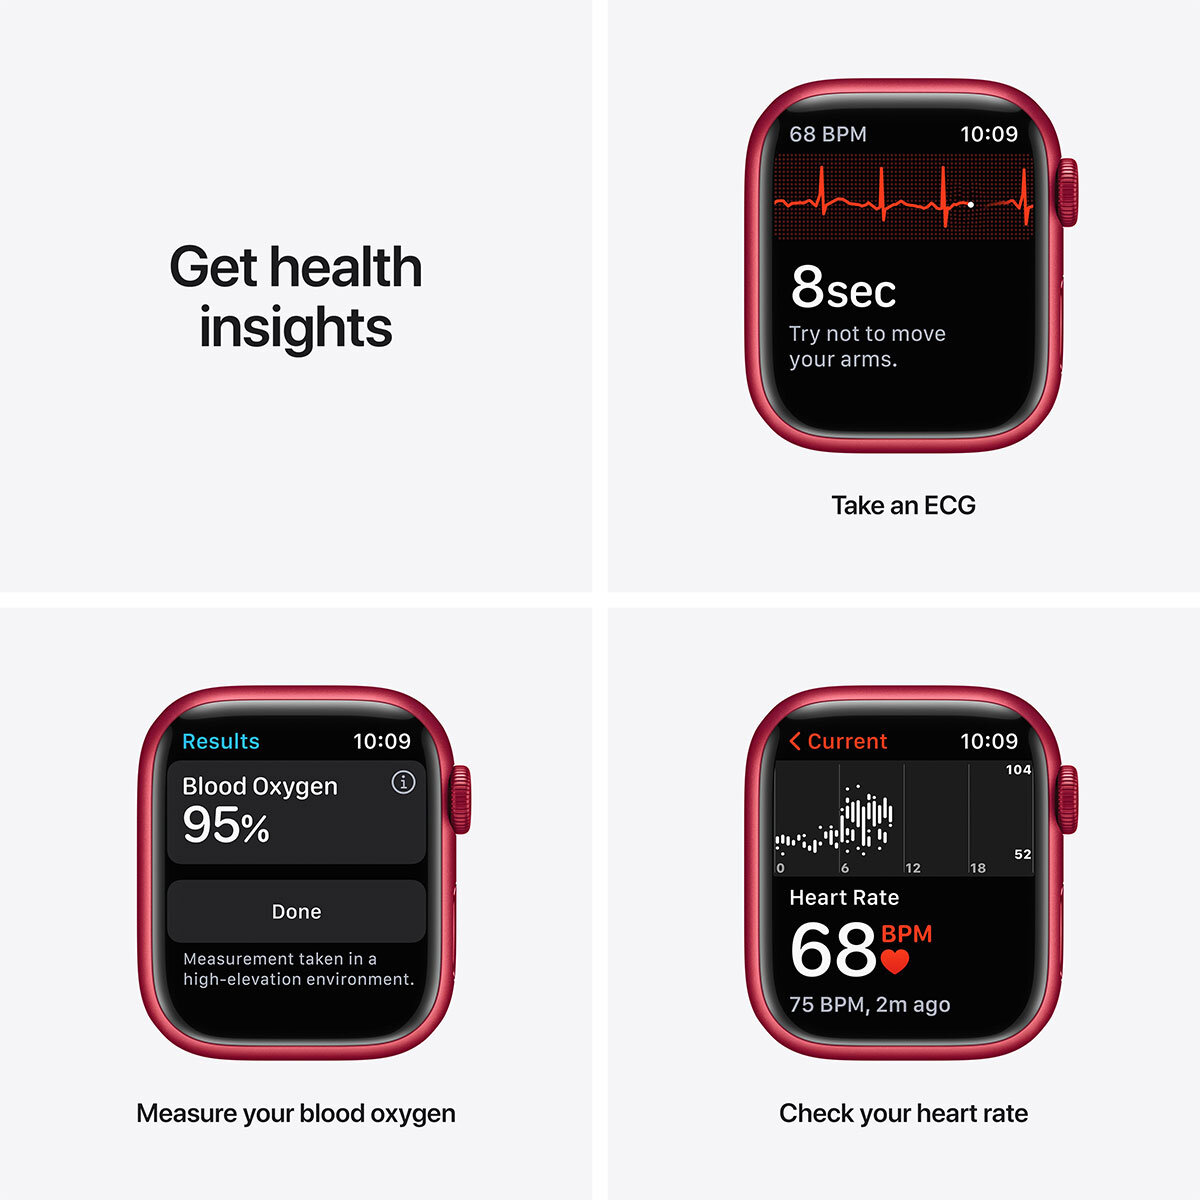 Buy Apple Watch Series 7 GPS + Cellular, 41mm (PRODUCT)RED Aluminium Case with (PRODUCT)RED Sport Band, MKHV3B/A at costco.co.uk